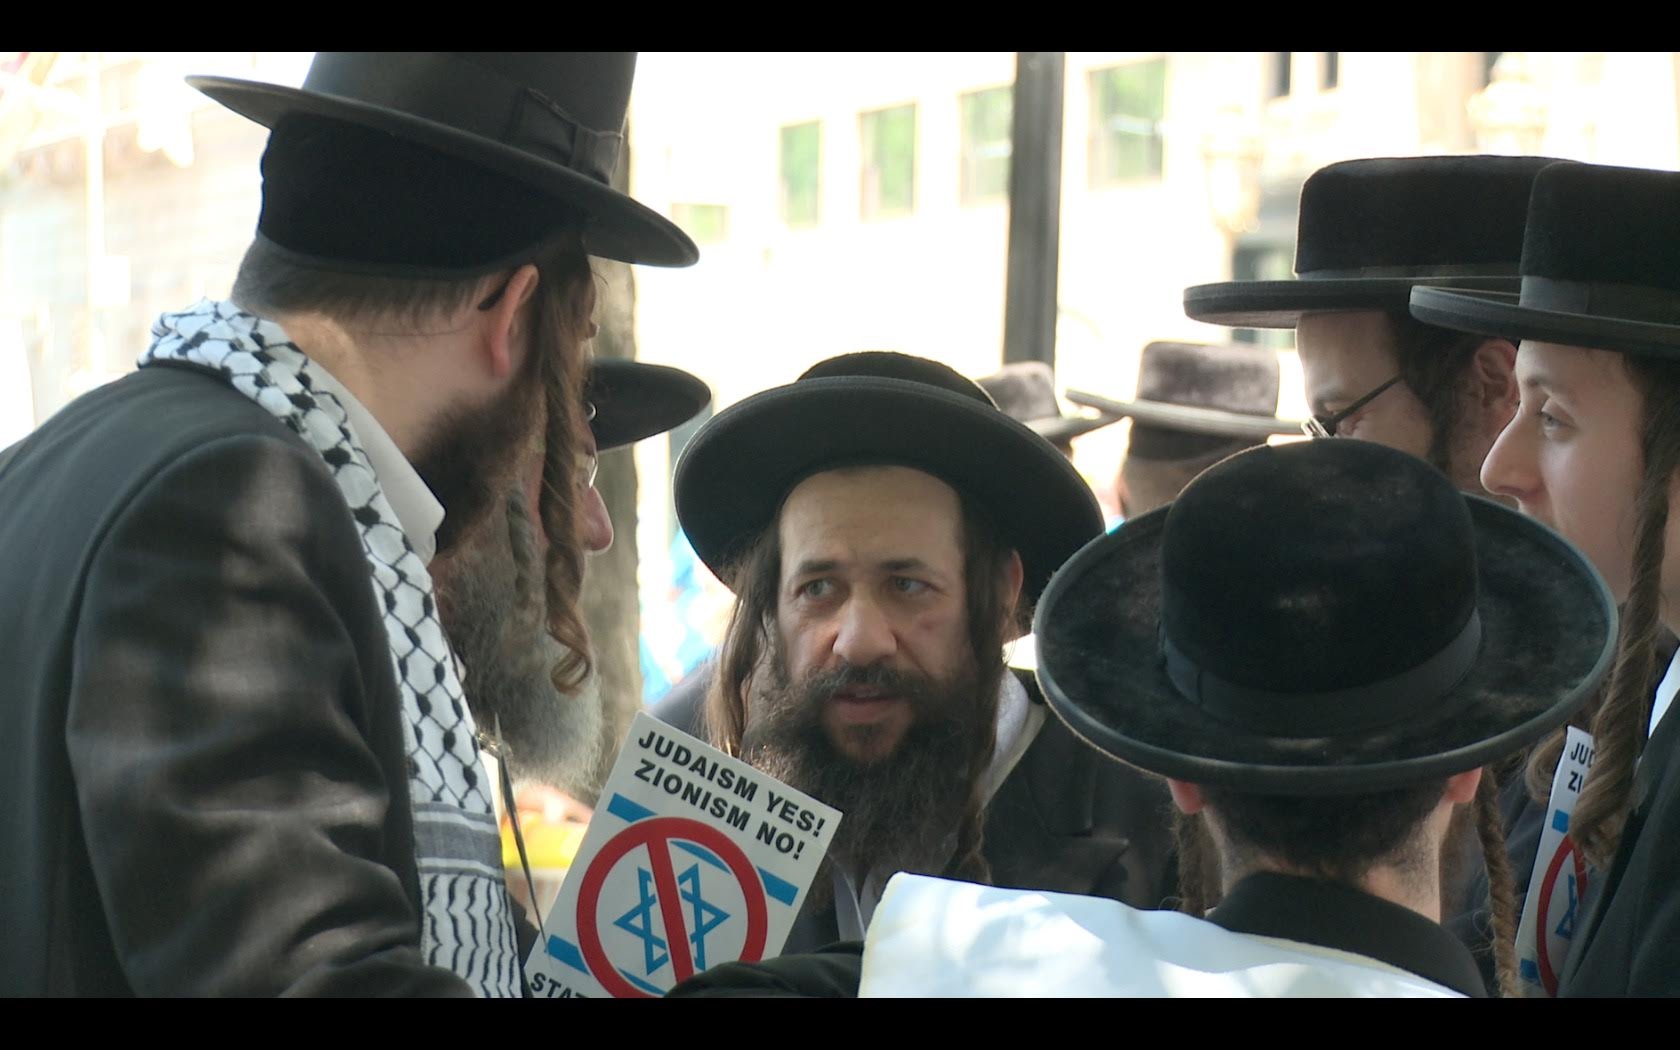 a group of rabbis standing together and talking